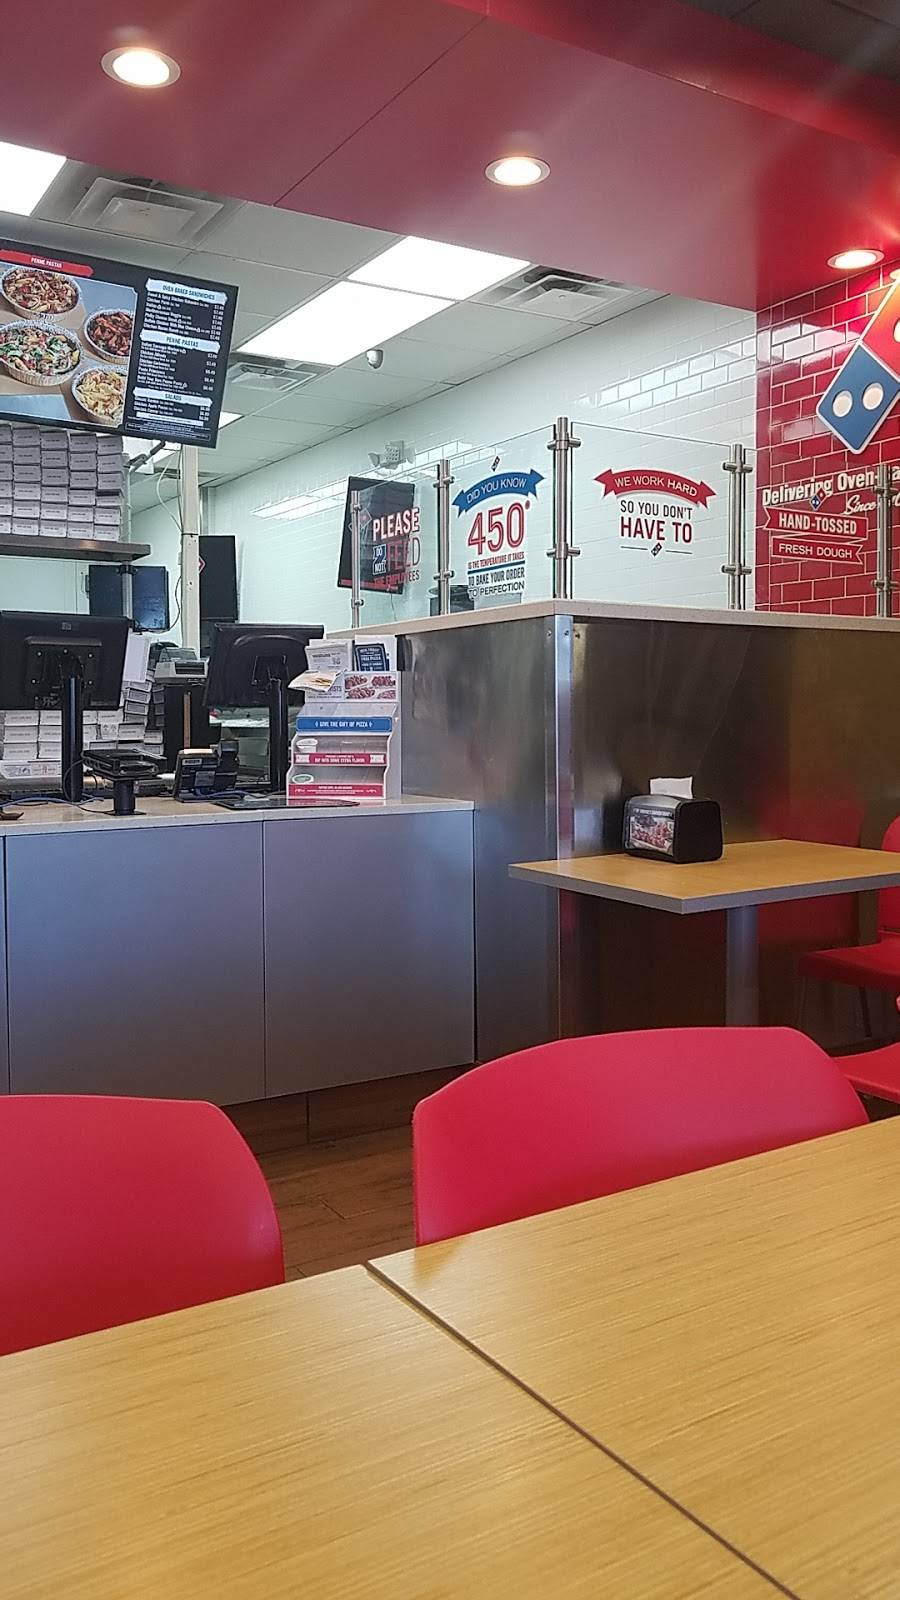 Dominos Pizza | meal delivery | 262 Boston Post Rd, Port Chester, NY 10573, USA | 9149675070 OR +1 914-967-5070